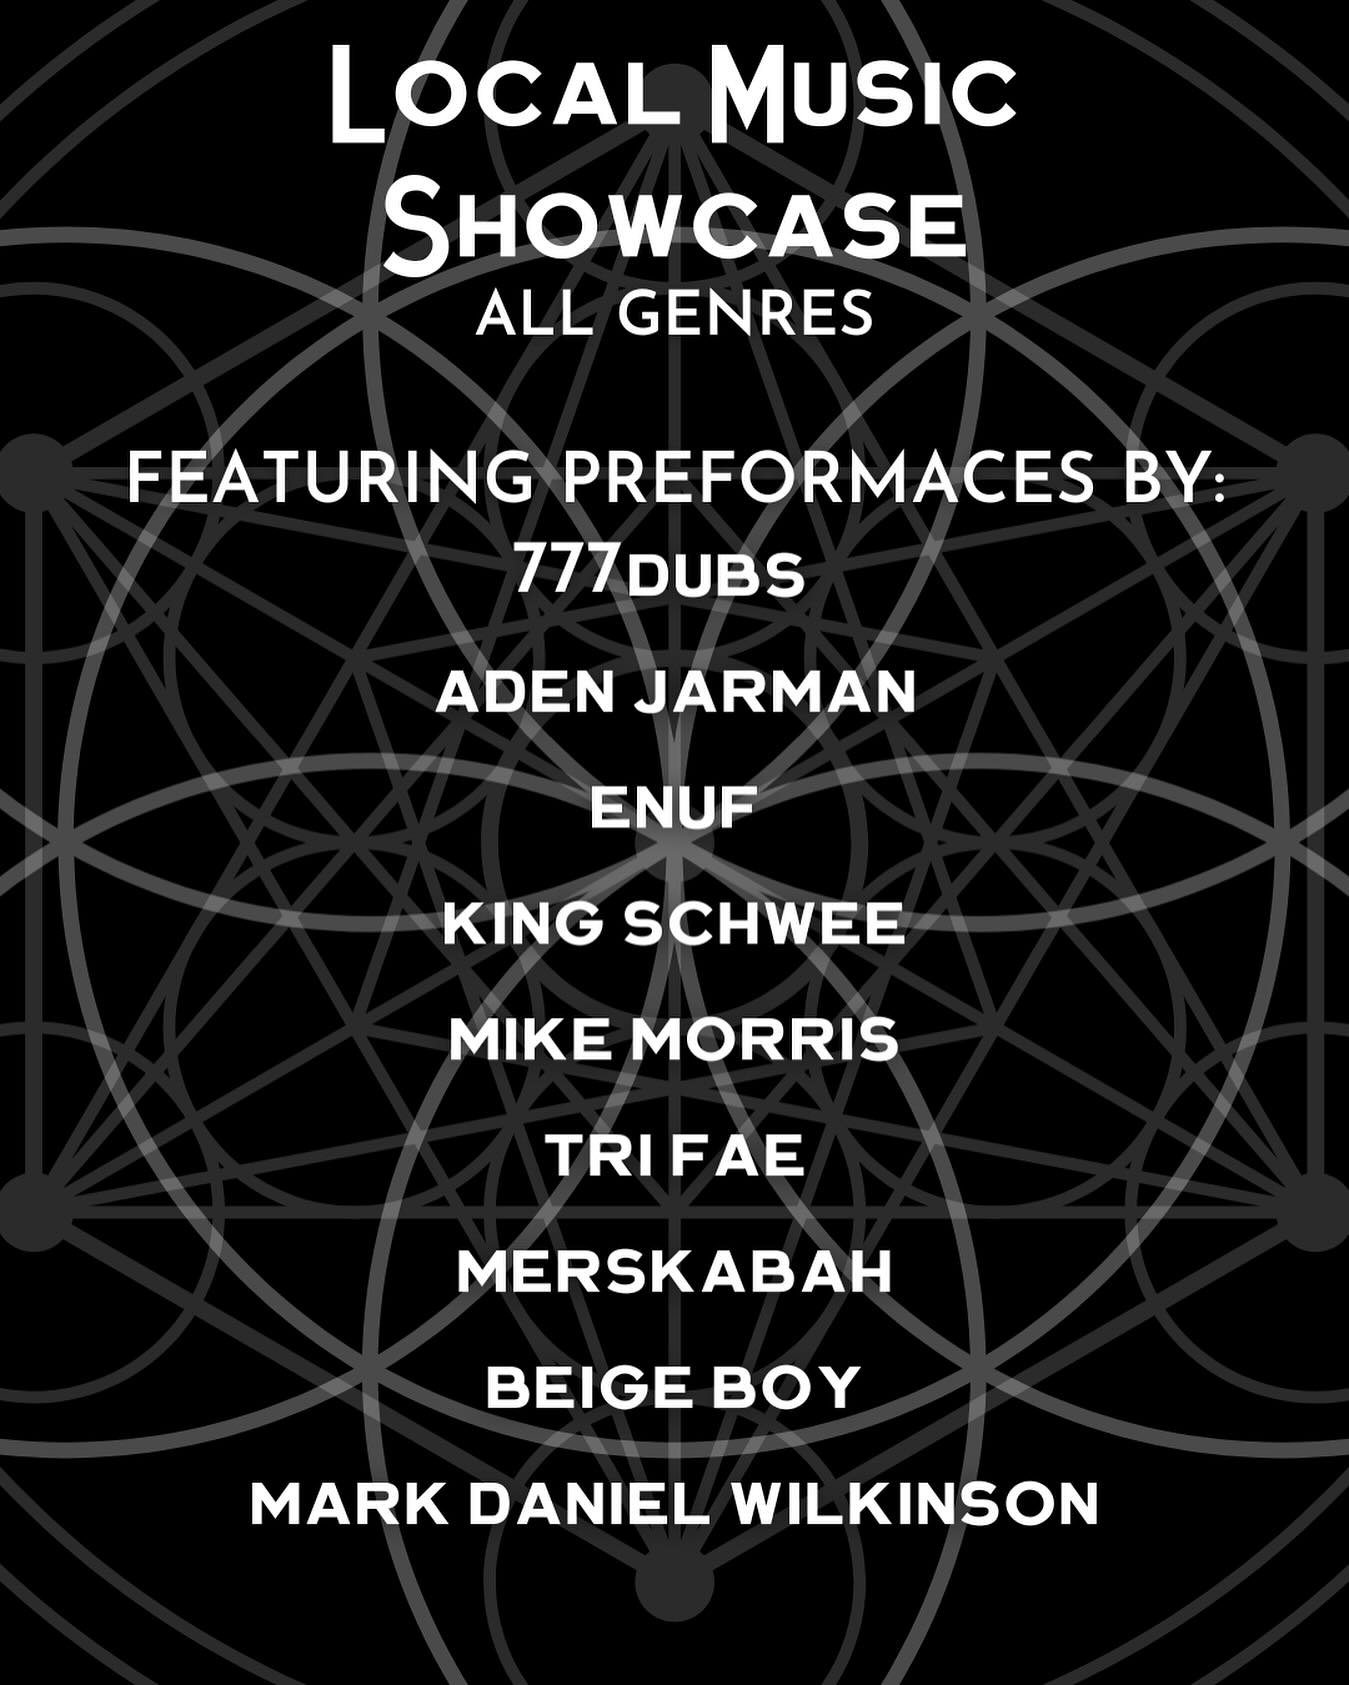 We are stoked to continue our Local Music Showcase series with an All Genre night next Saturday, May 11th! We will be featuring talent from: 777DUBS, Aden Jarman, ENUF, King Schwee, Mike Morris, tri fae, Merskabah, Beige Boy, Mark Daniel Wilkinson. P